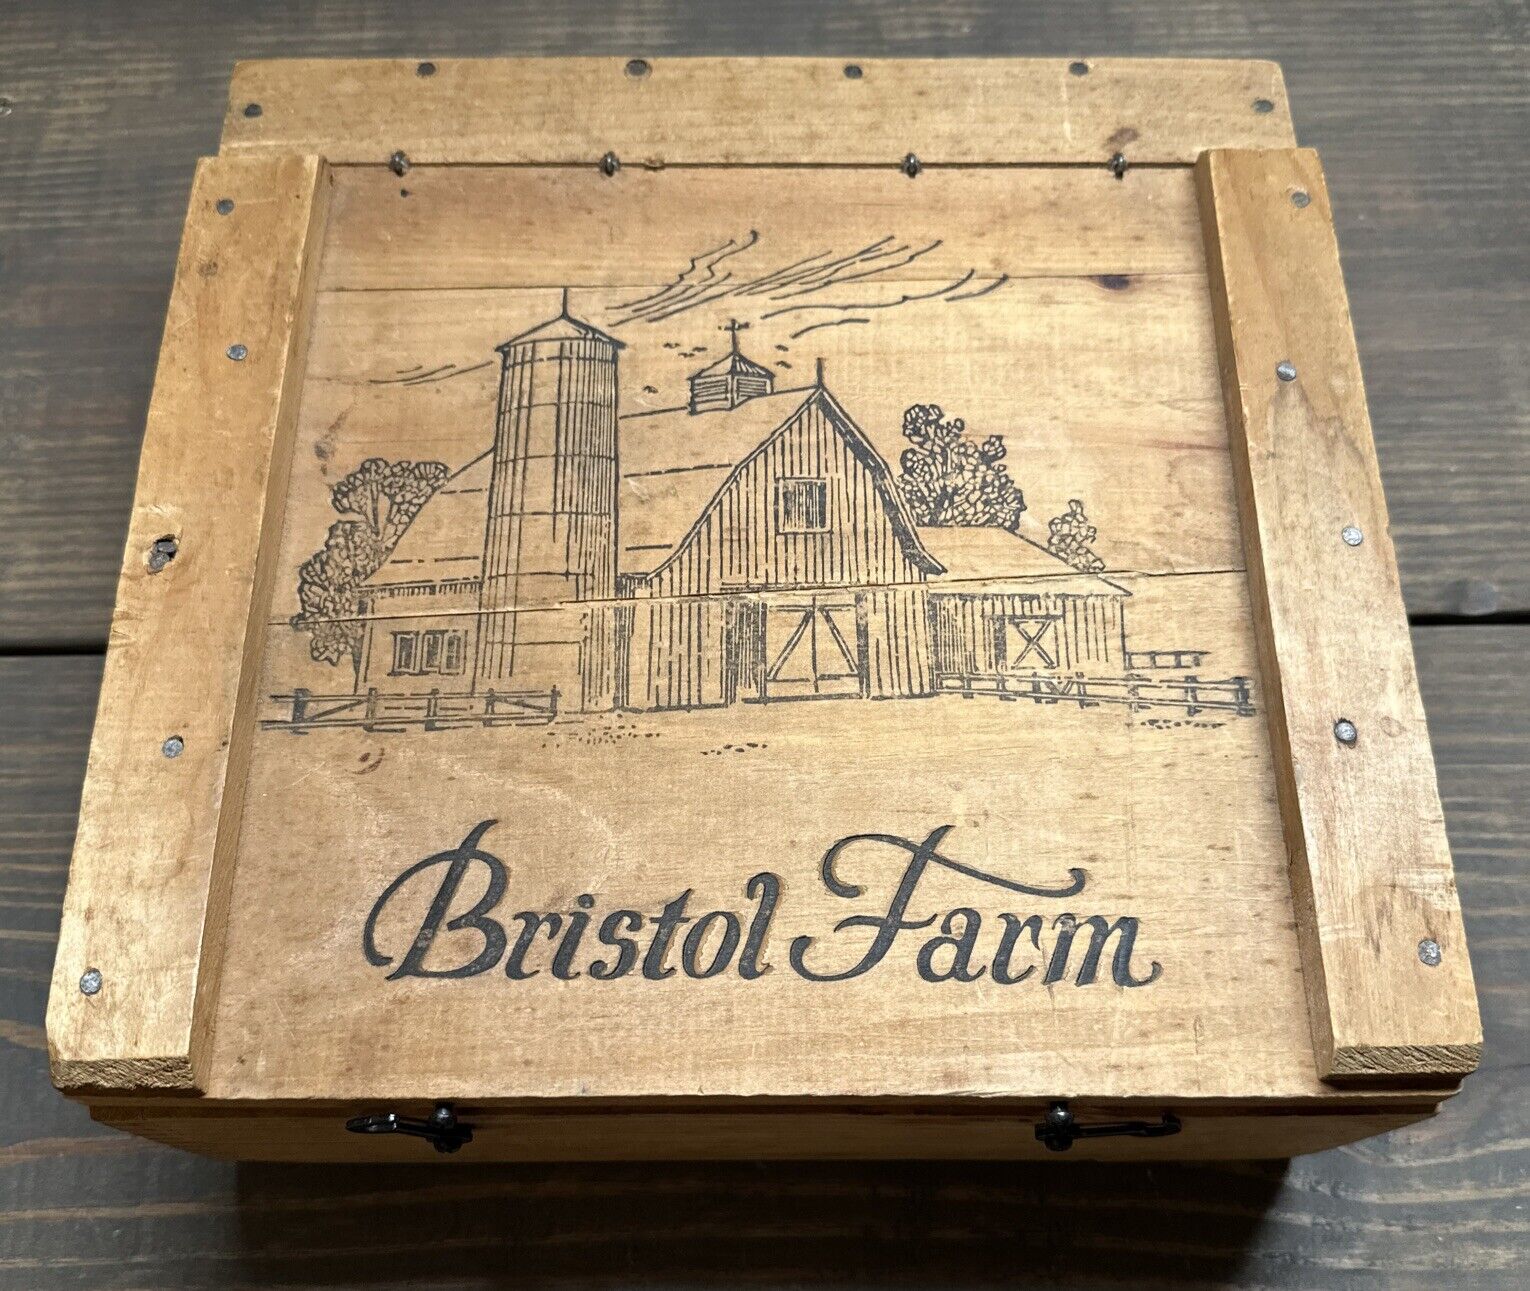 Vintage Bristol Farm Rustic Wood Fruit Box With Hinged Lid Etched Design 11x11.2